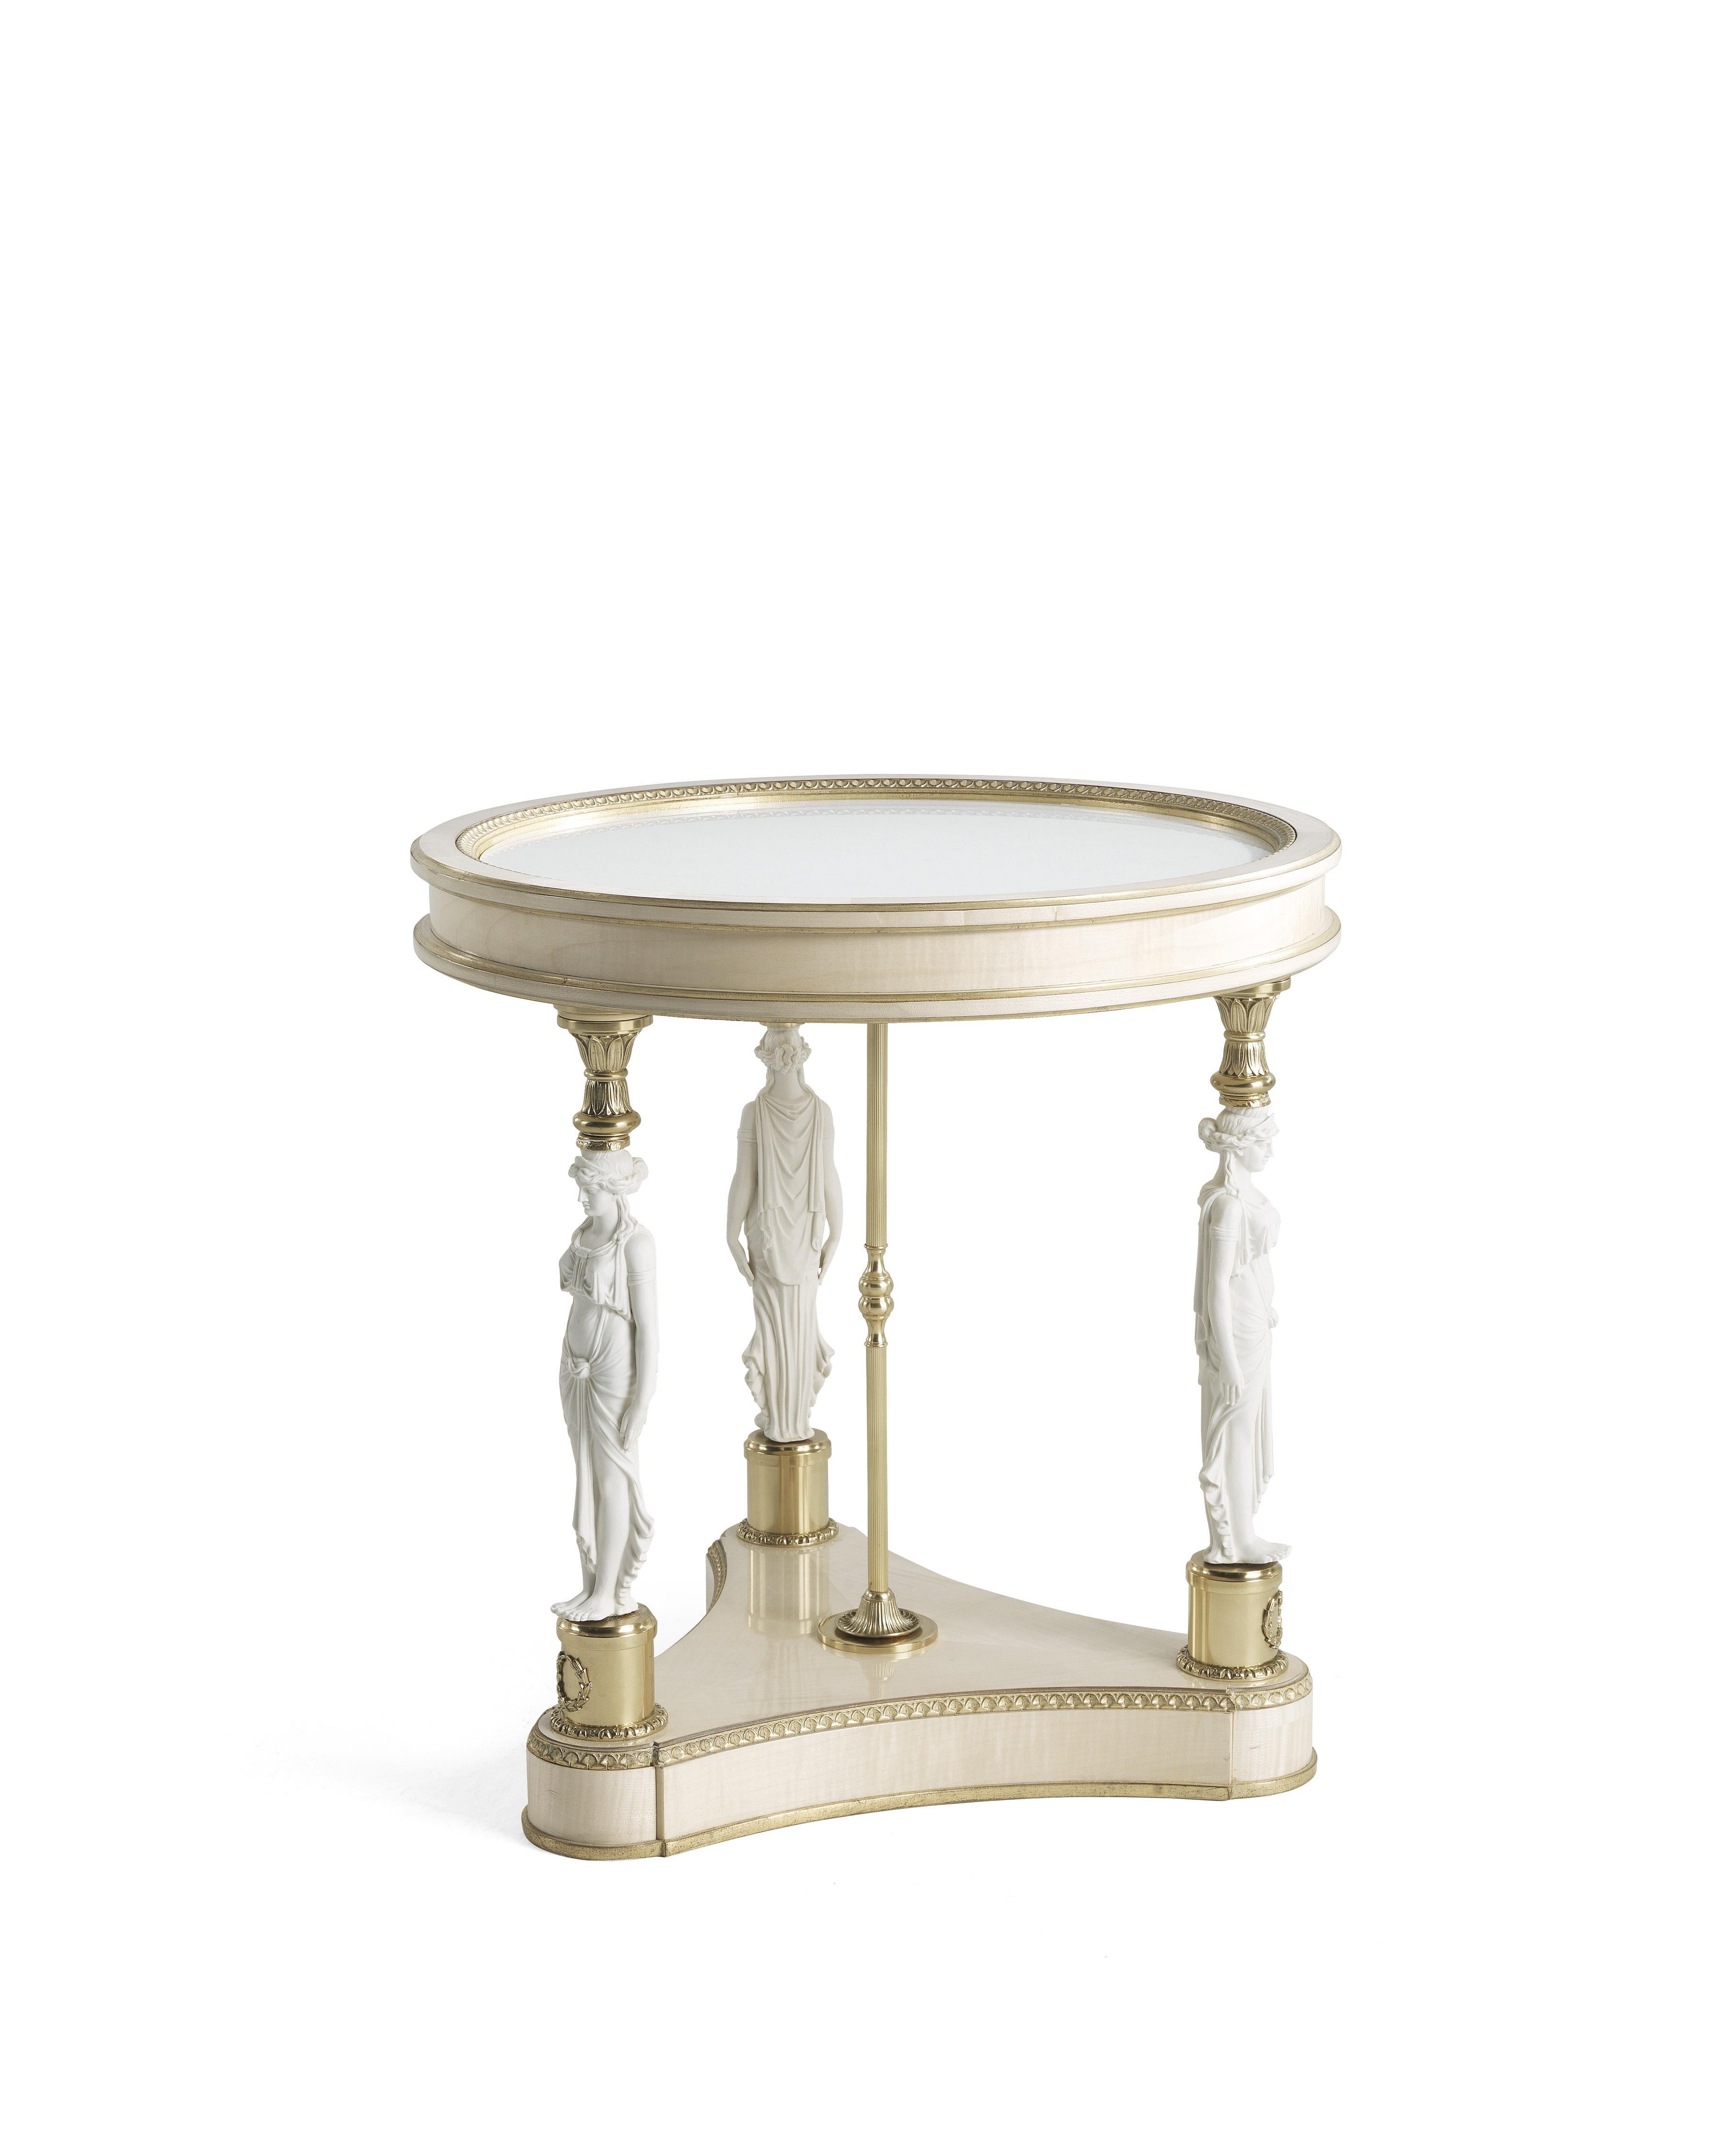 A bright and clean classic style with a western-inspired decorative spirit: the Toulouse line, composed of side table, central table, night table and chest of drawers, with gold leaf details perfectly expresses Jumbo Collection’s decorative spirit,